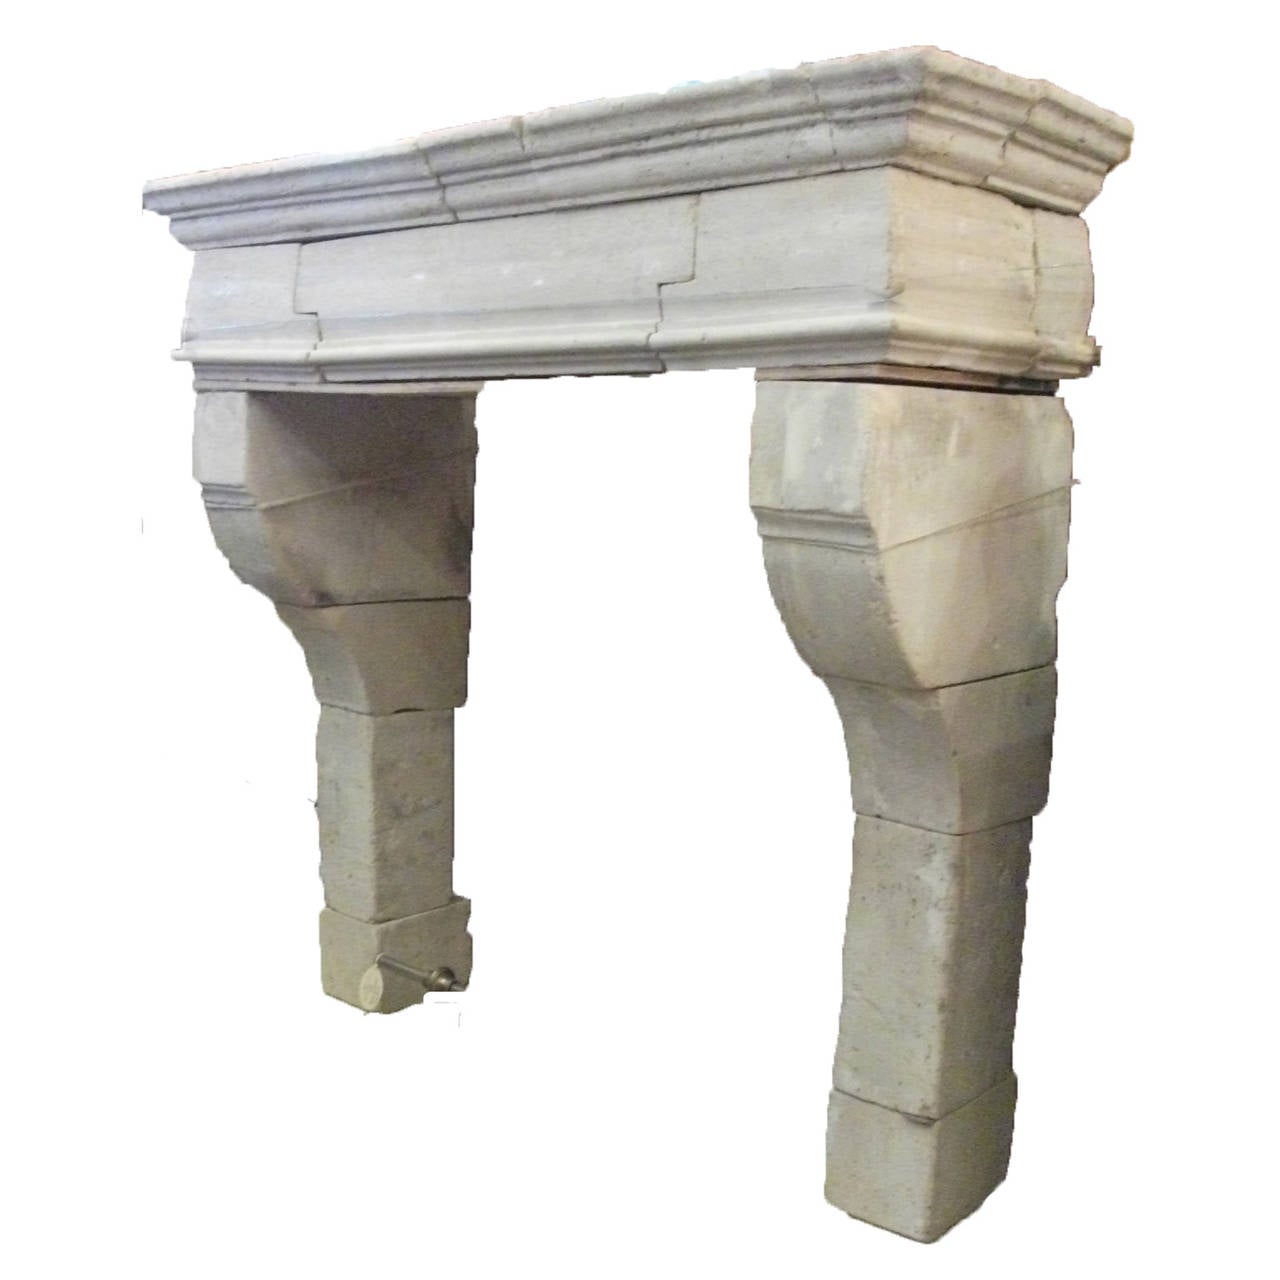 Antique French Limestone fireplace. This Louis XIII style fireplace is handcrafted in limestone. This limestone fireplace is in good condition and from the 18th century. Very bold traditional style mantel with curved accents at the top of the